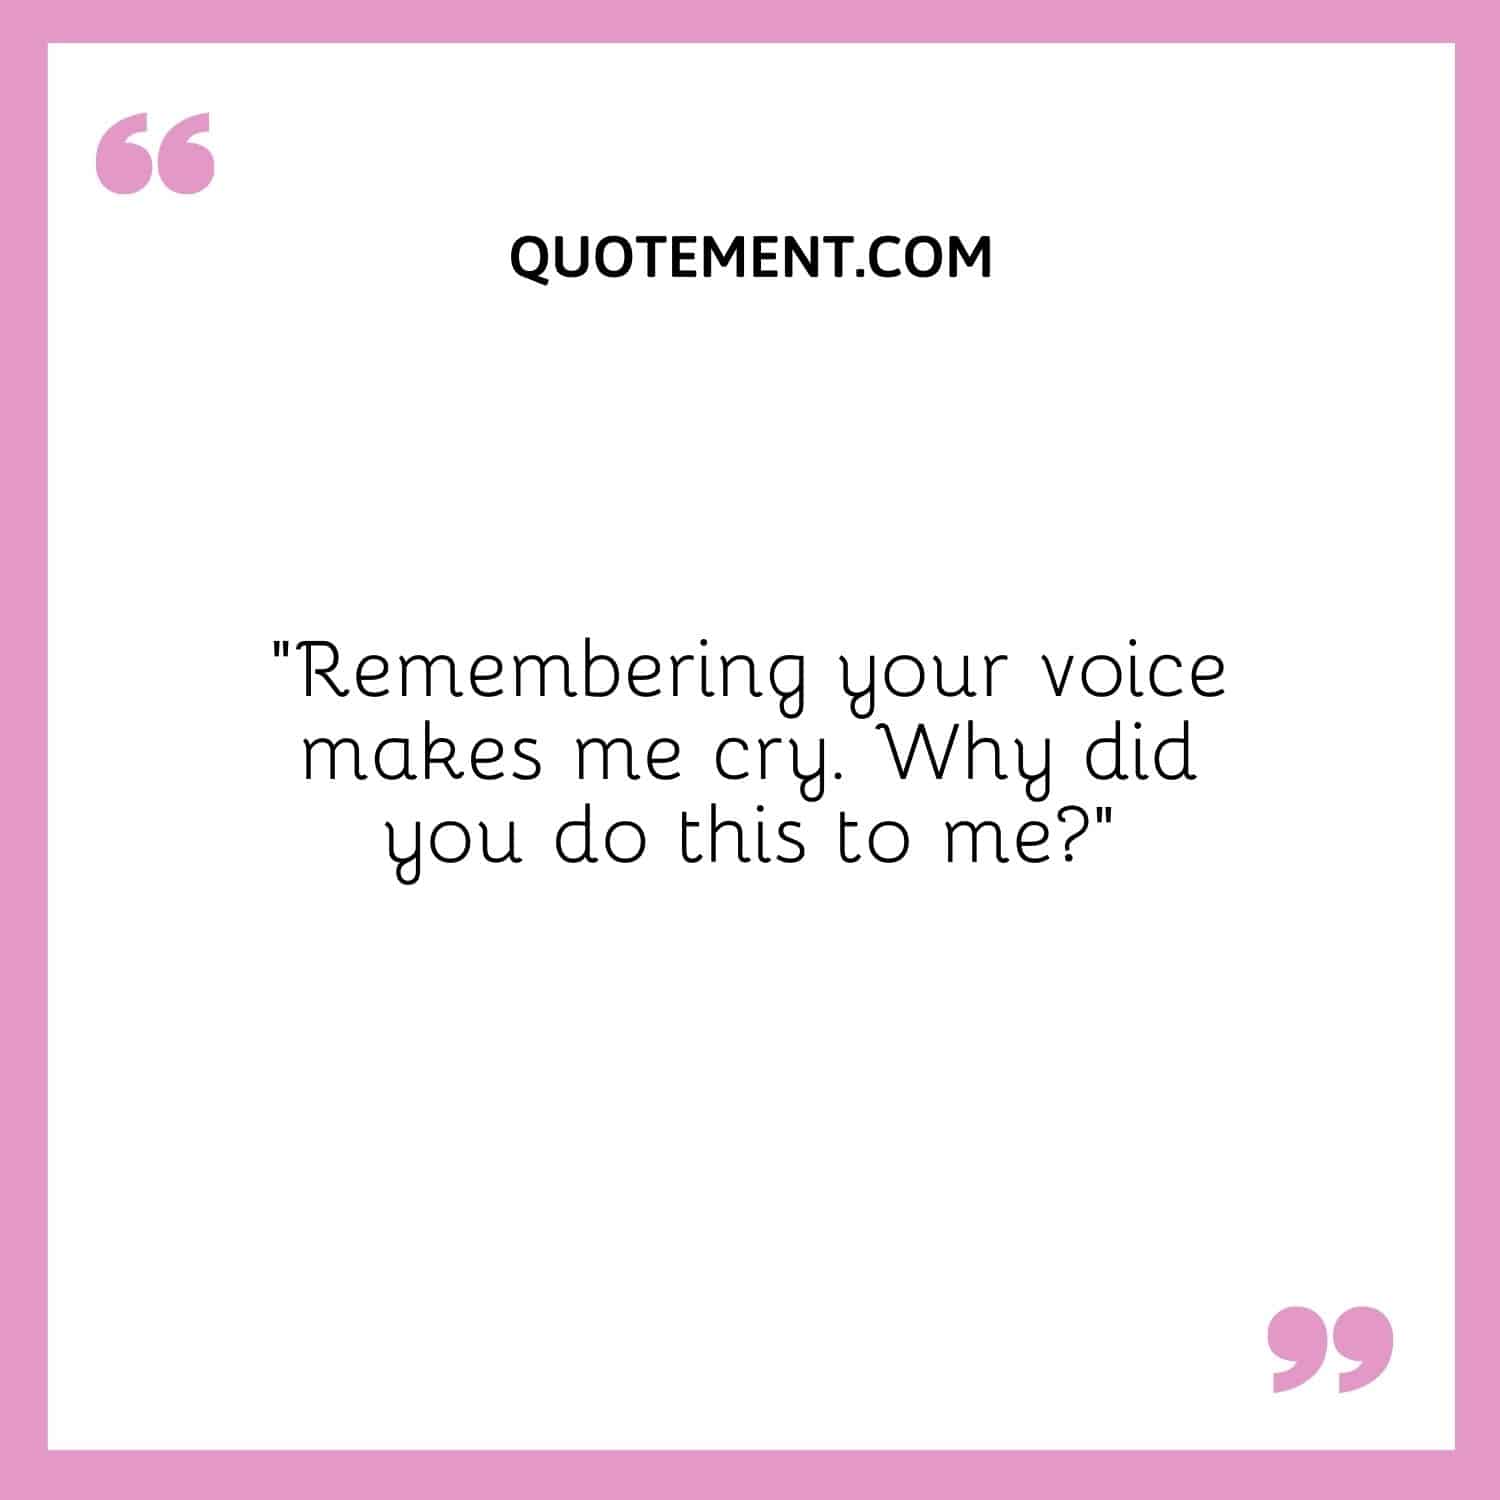 Remembering your voice makes me cry.